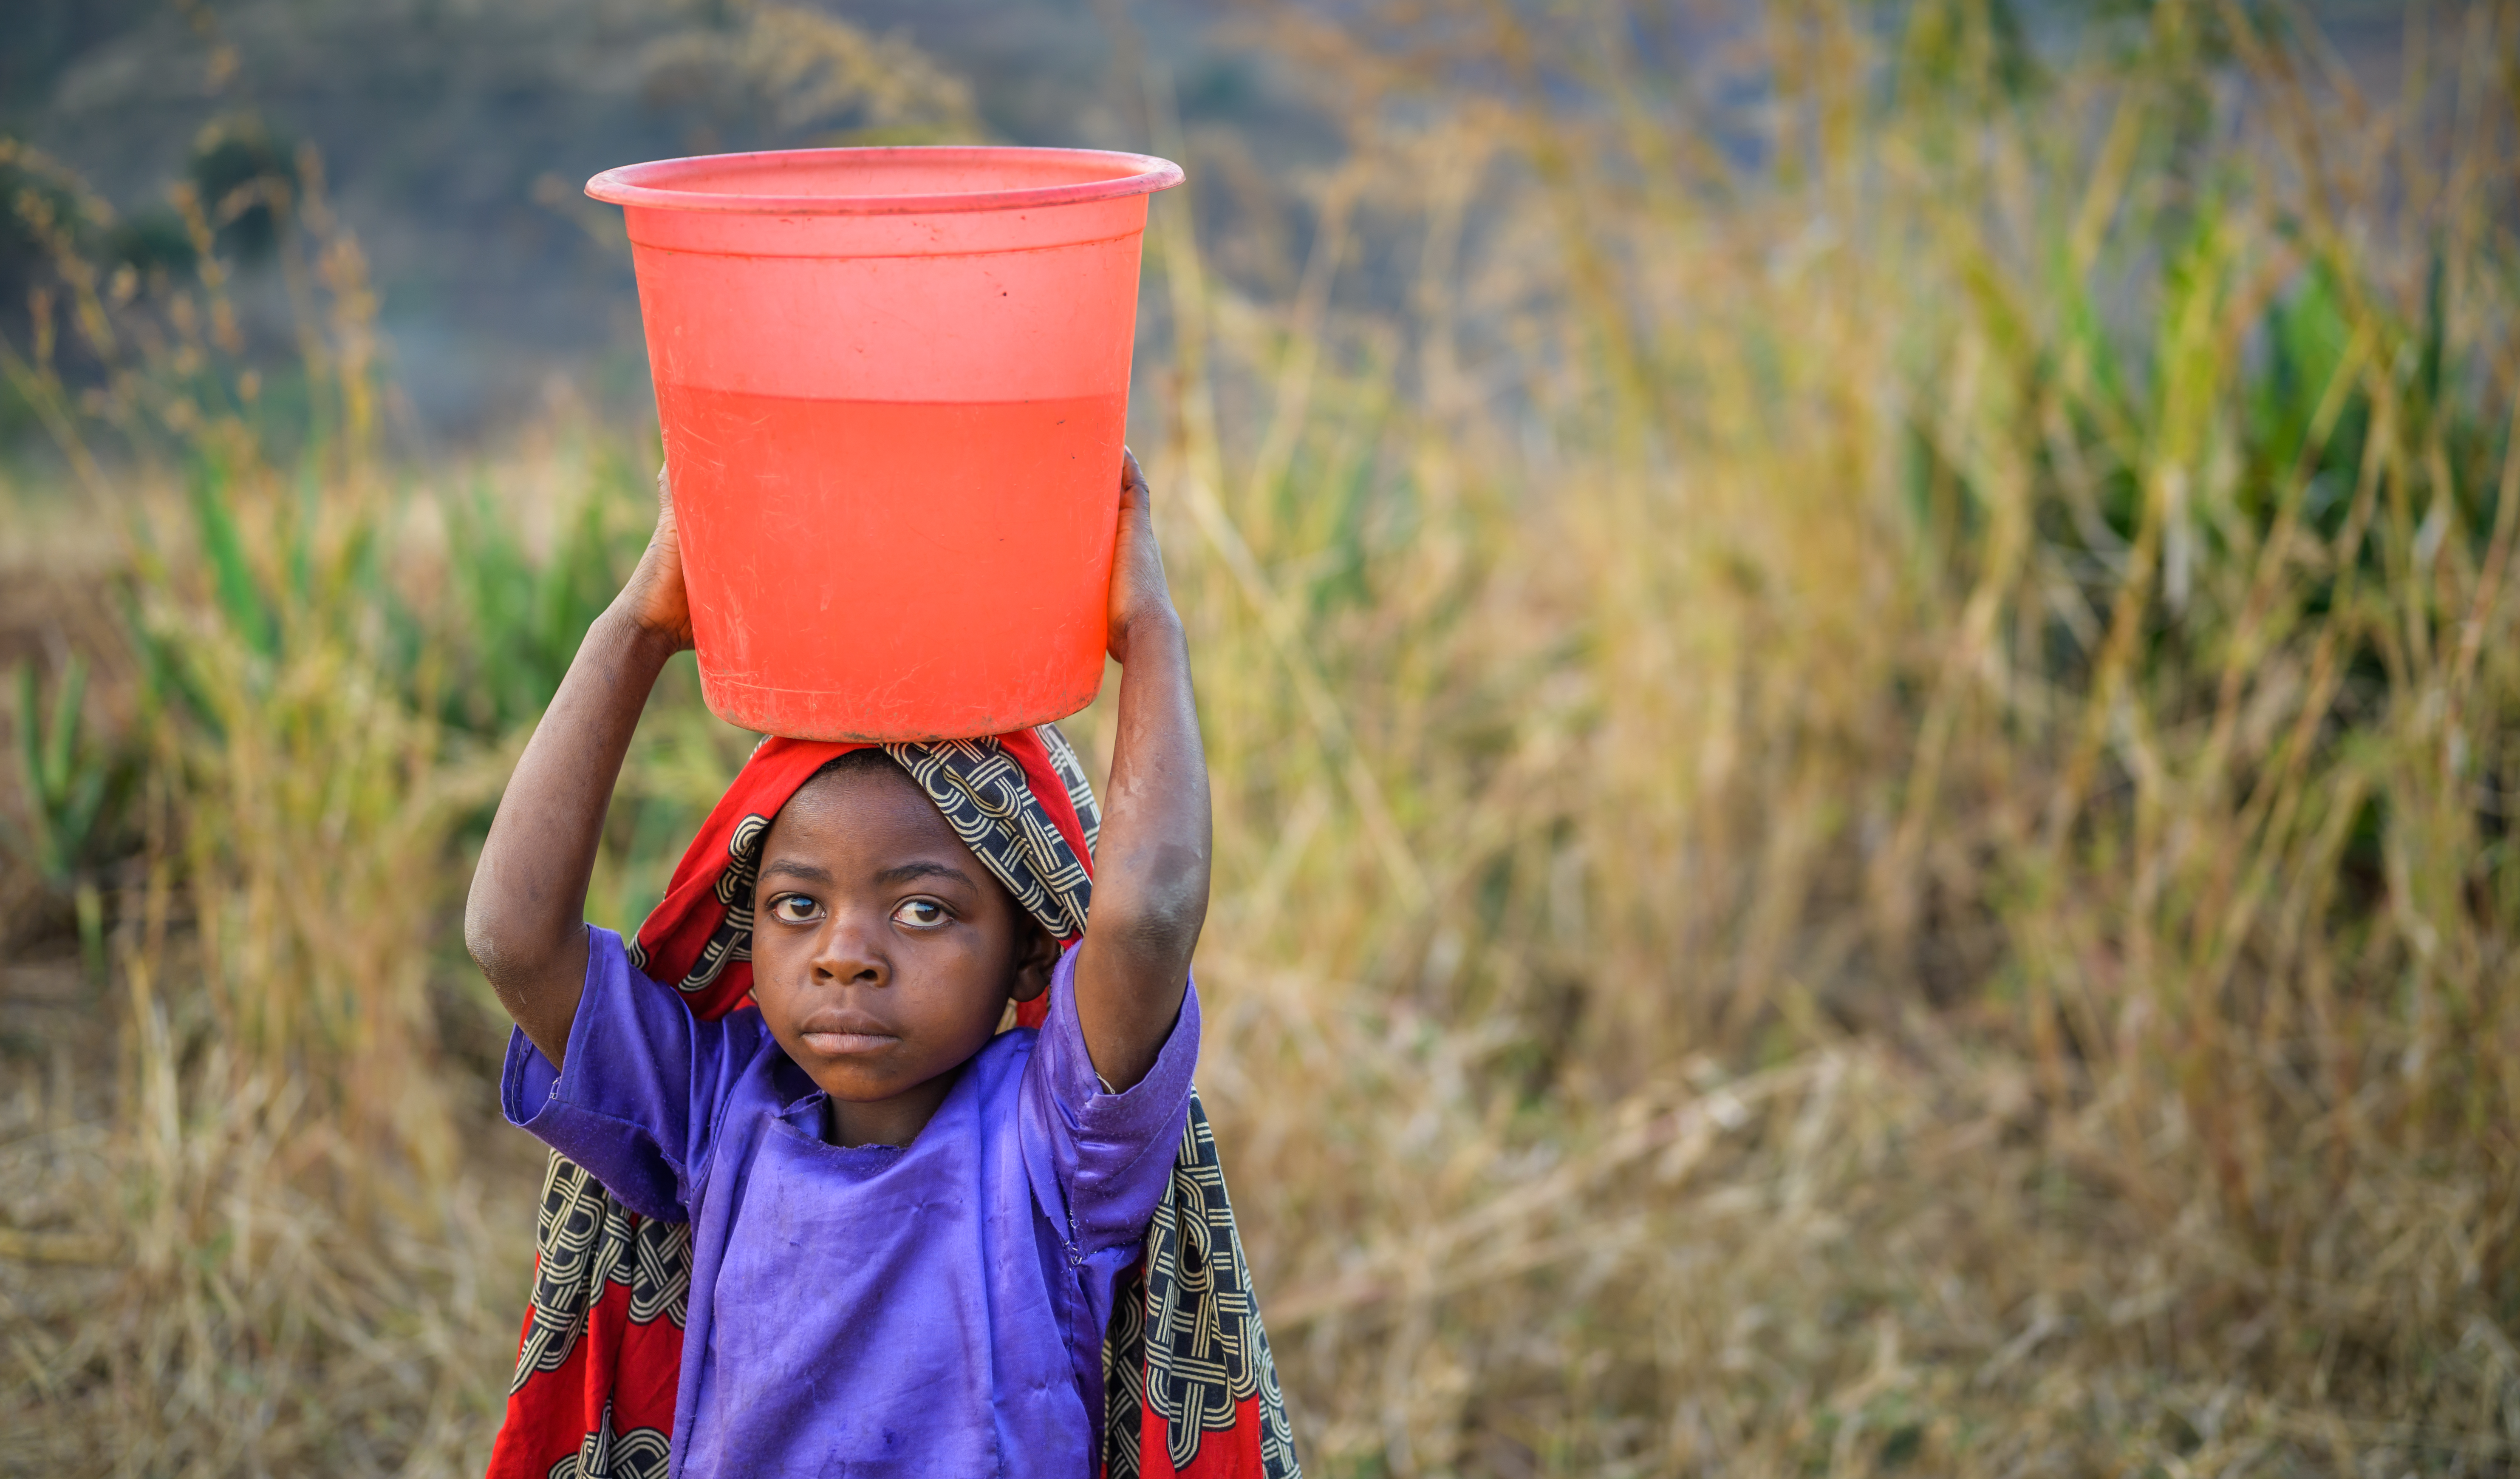 Child in Malawi walks holding a bucket of water over their head